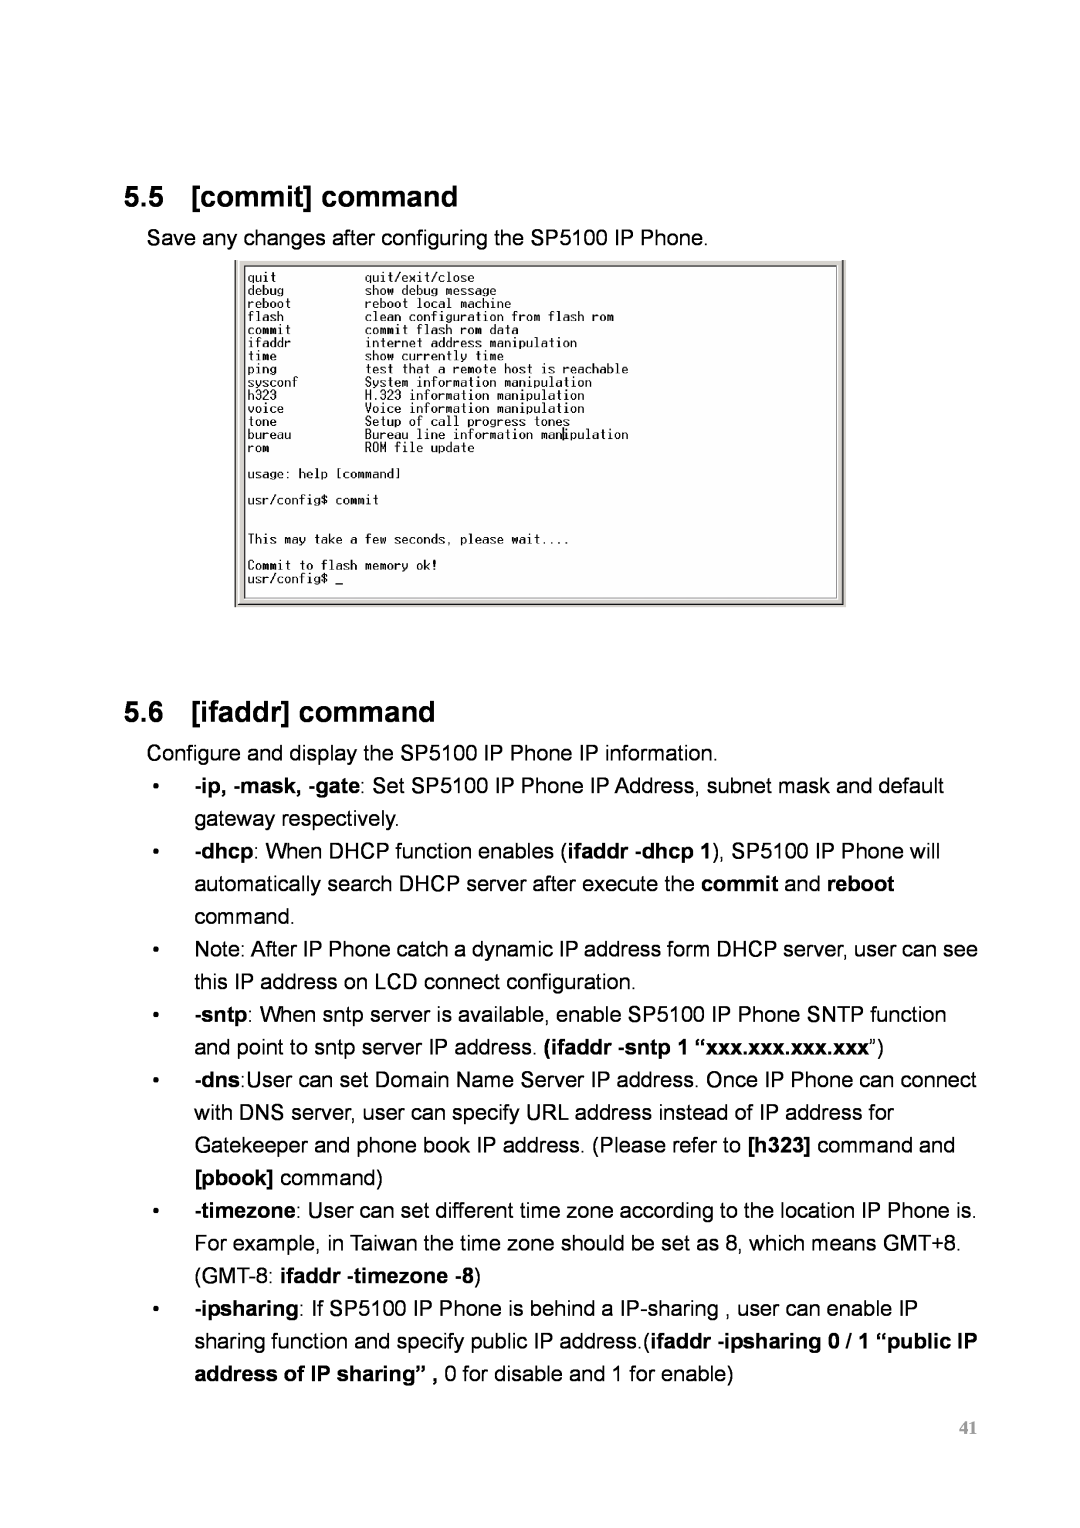 MicroNet Technology SP5100 user manual commit command, ifaddr command 